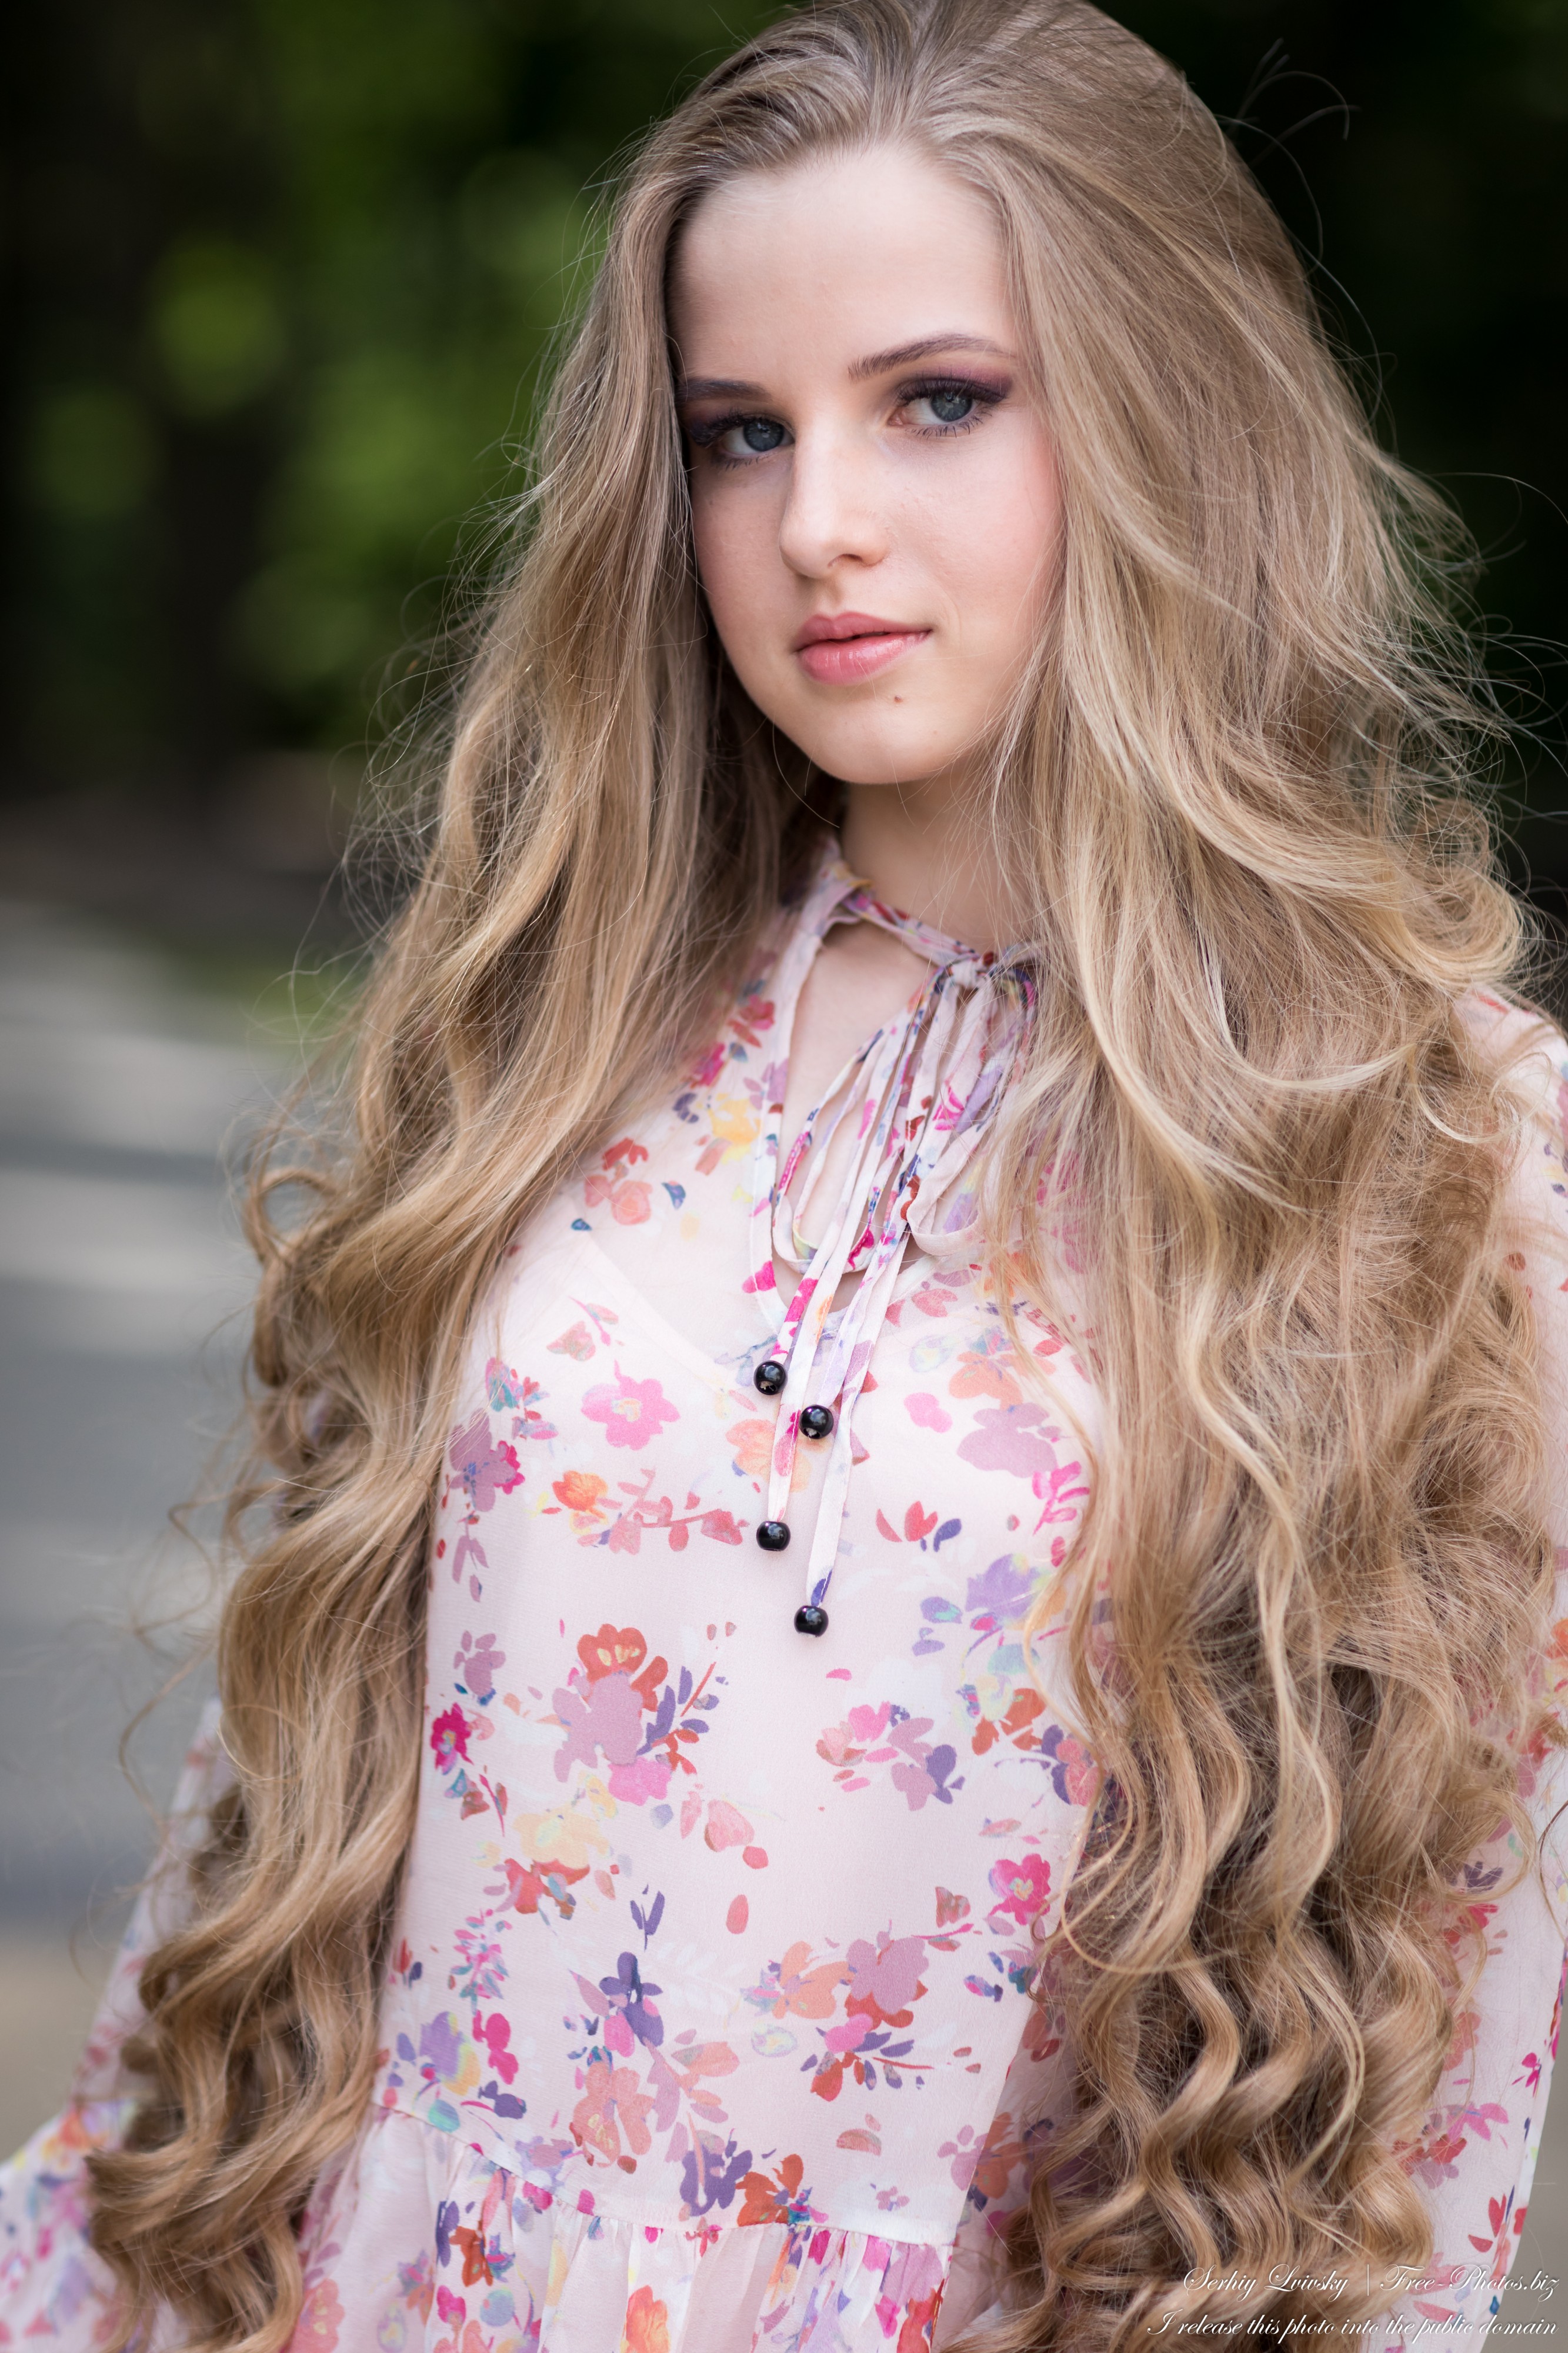 Photo Of Diana An 18 Year Old Natural Blonde Girl Photographed By Serhiy Lvivsky In July 2020